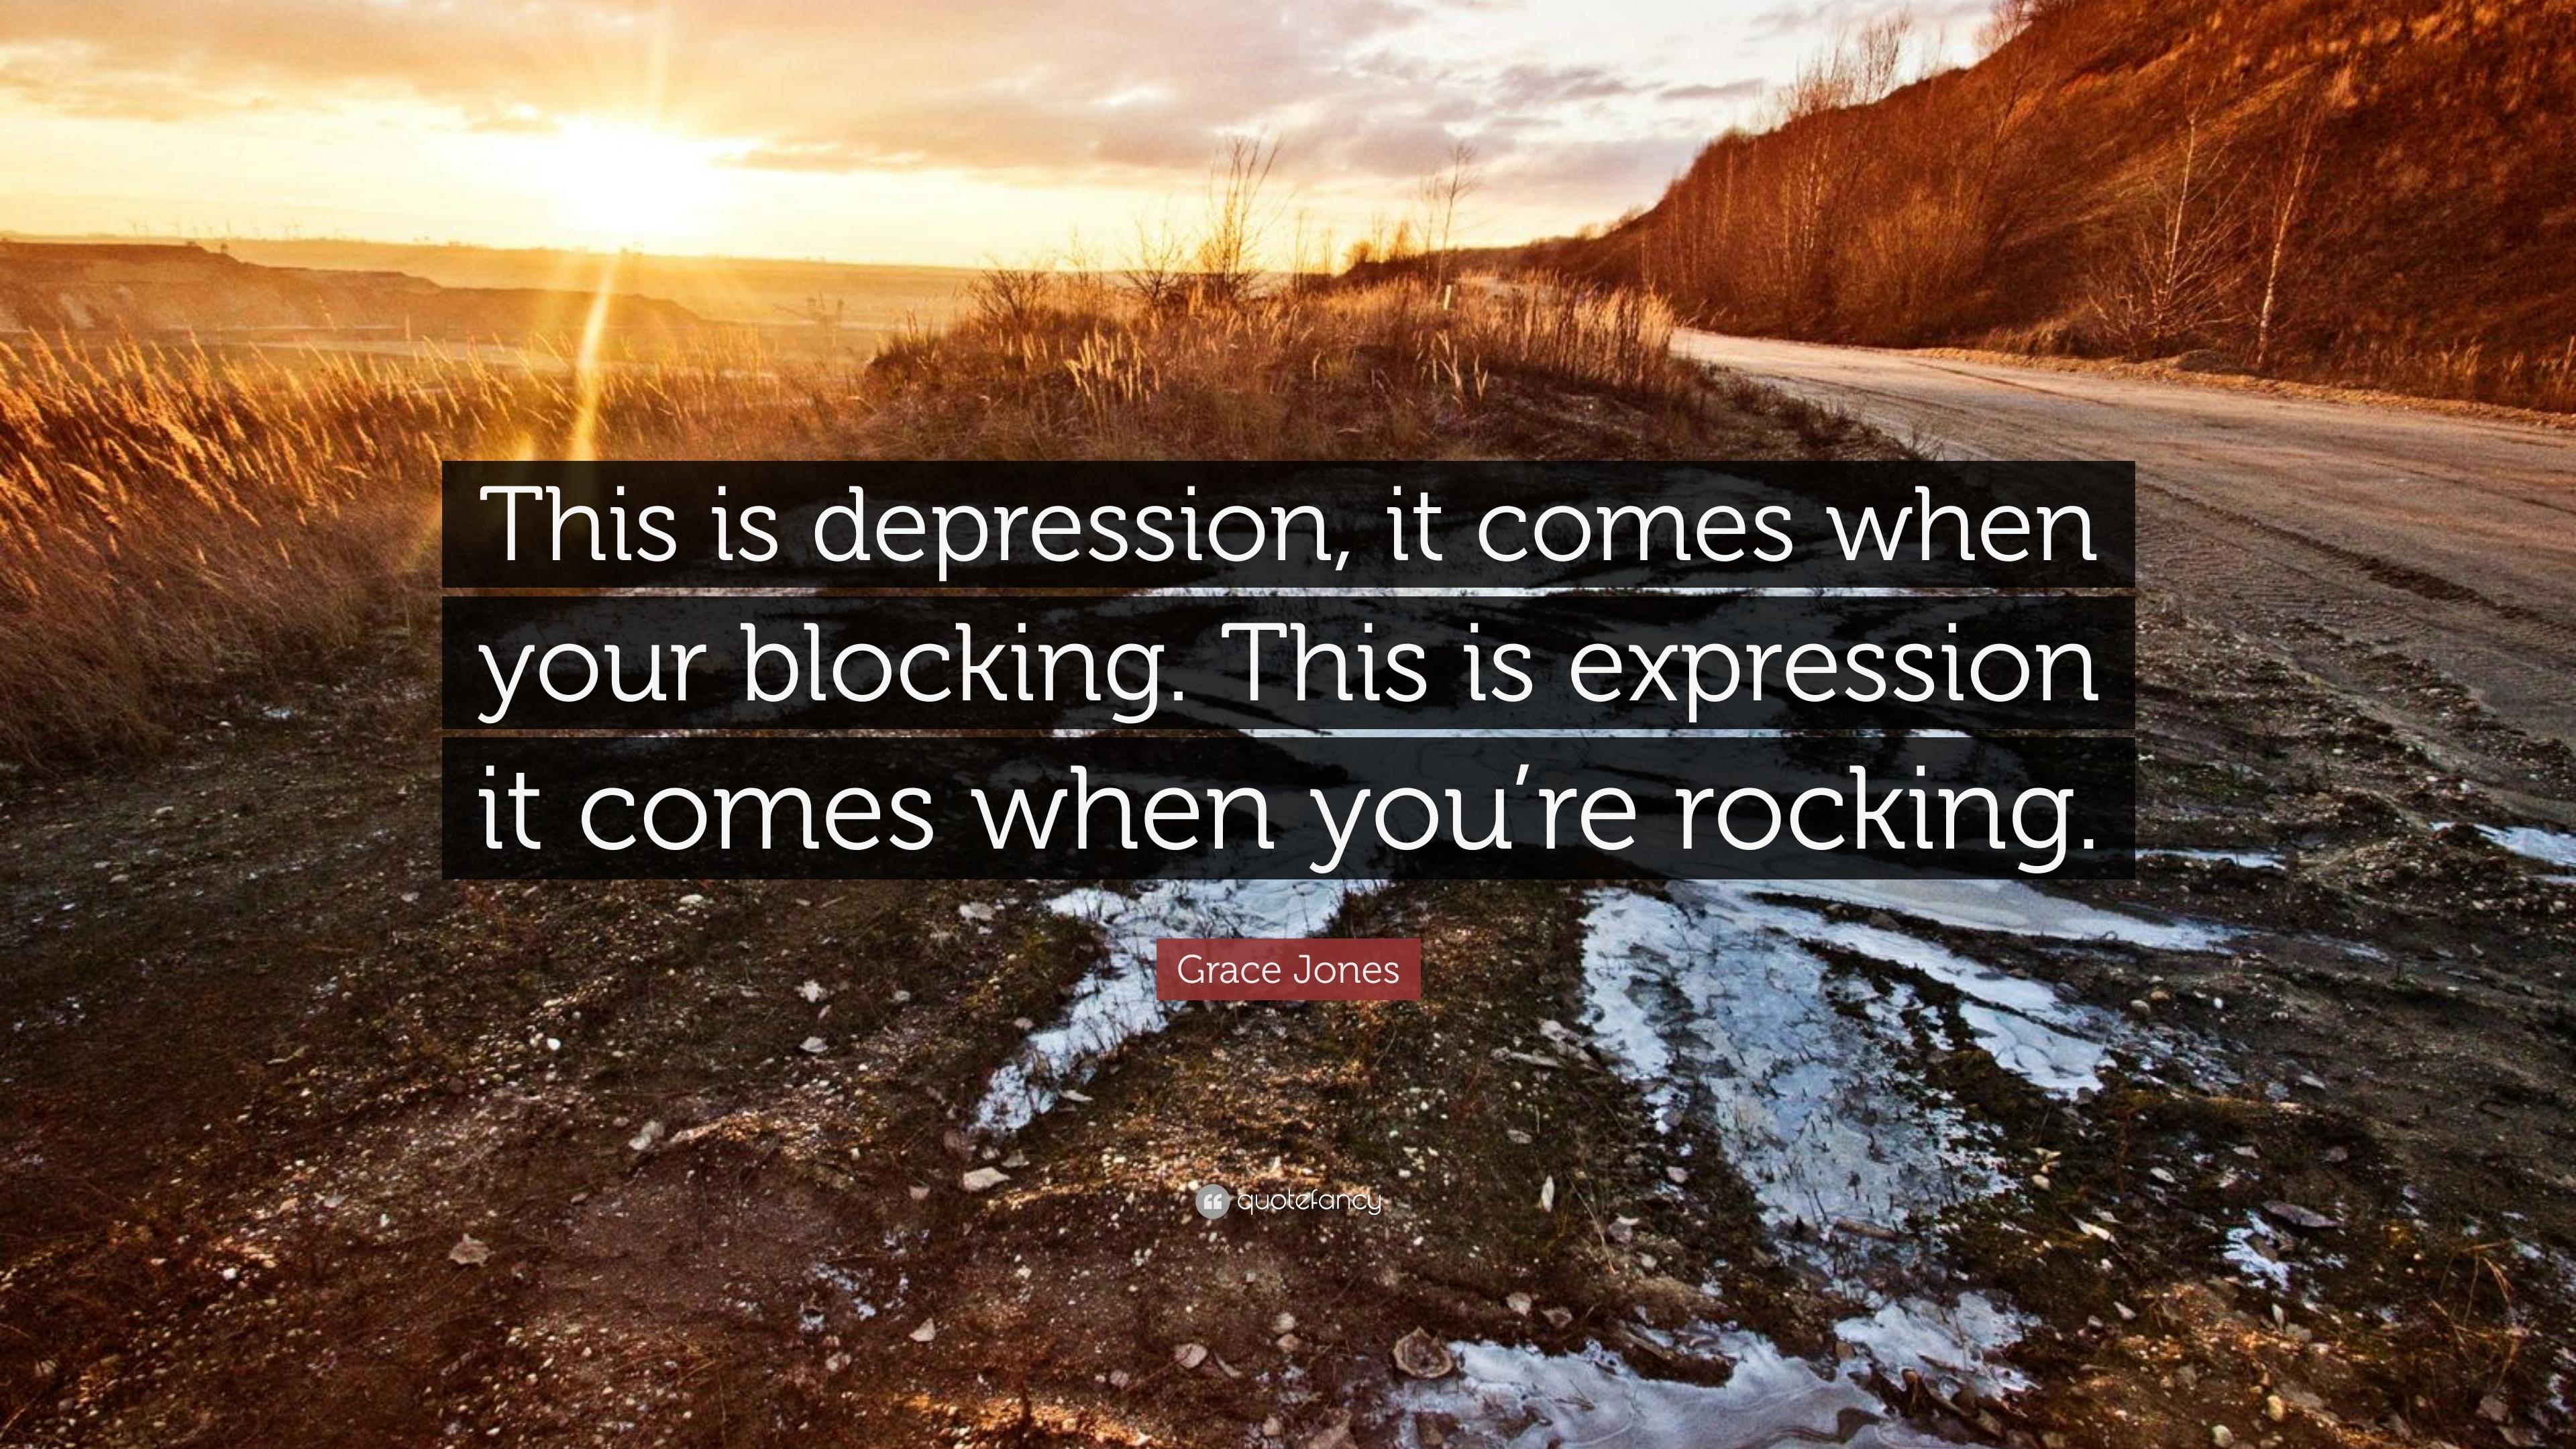 Grace Jones Quote: “This is depression, it comes when your blocking